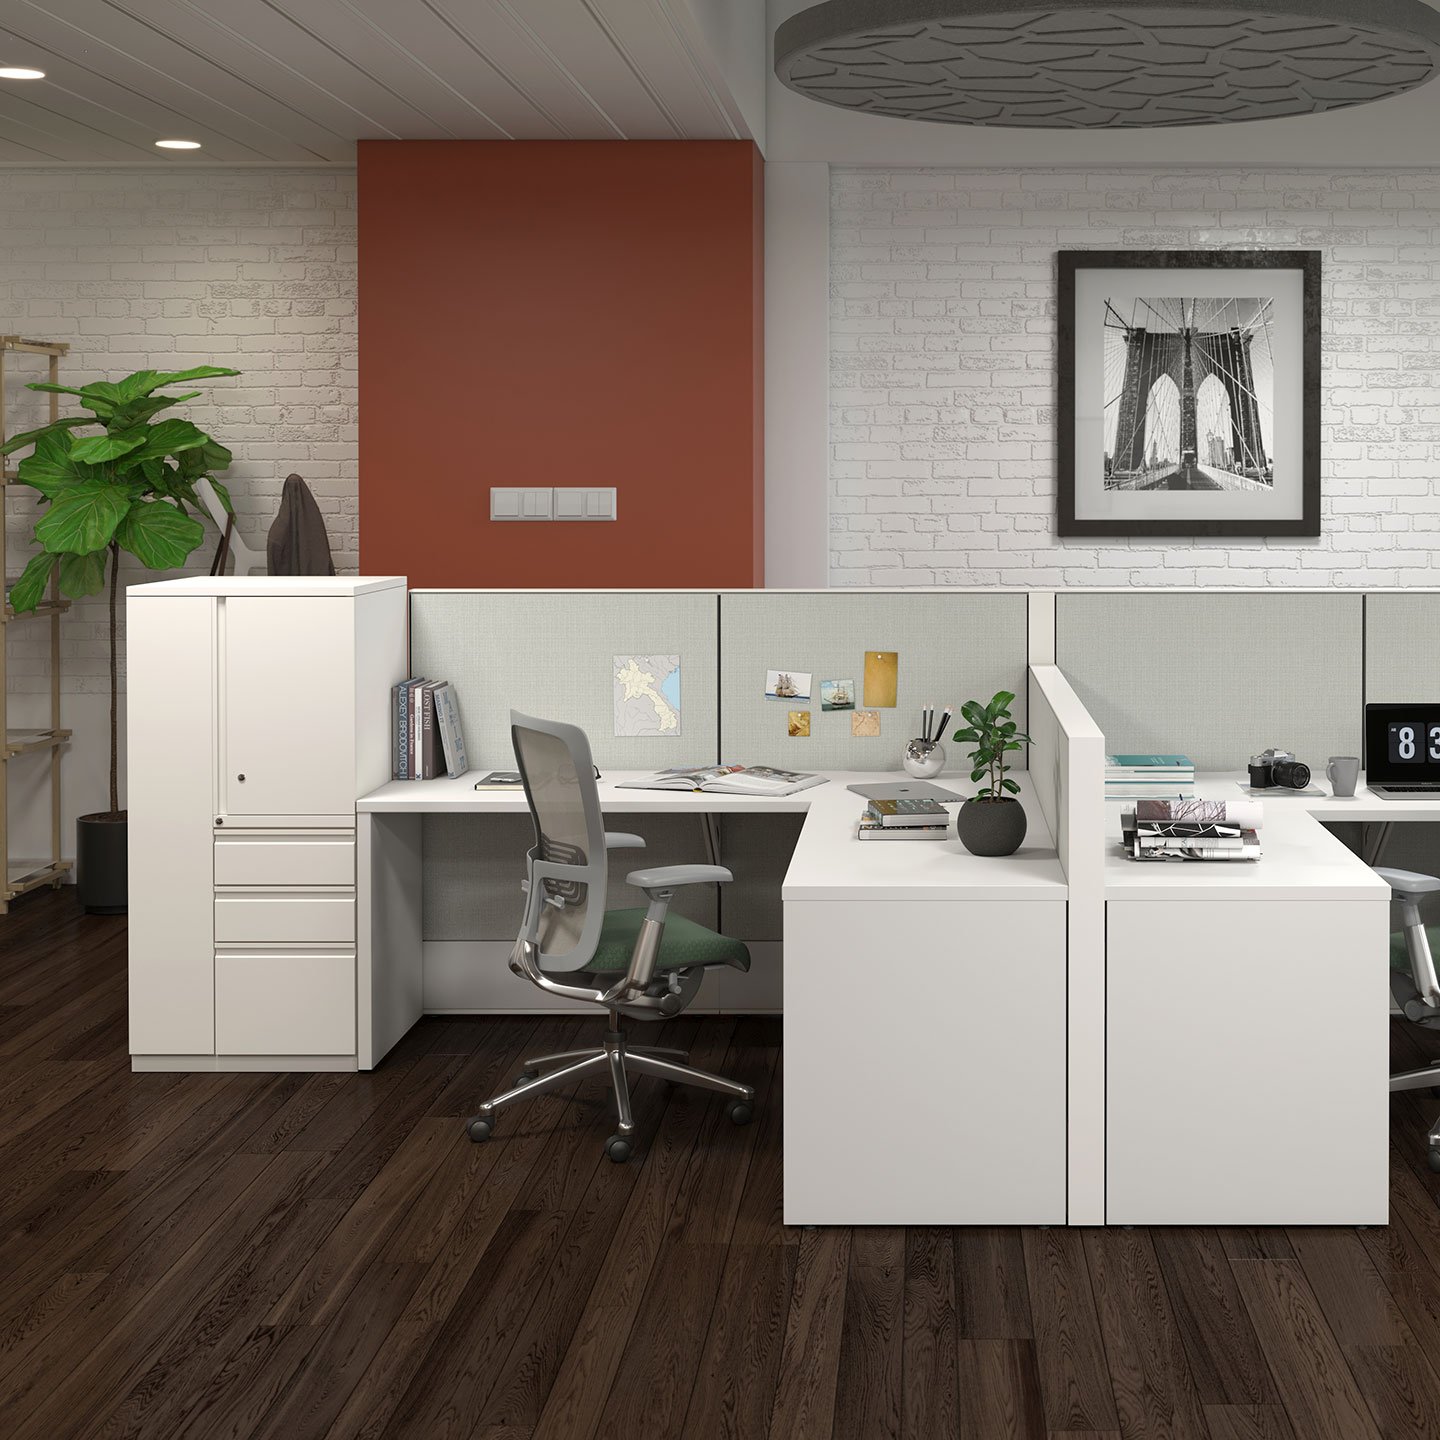 V Series storage unit in white at individual workspace with Zody chair.